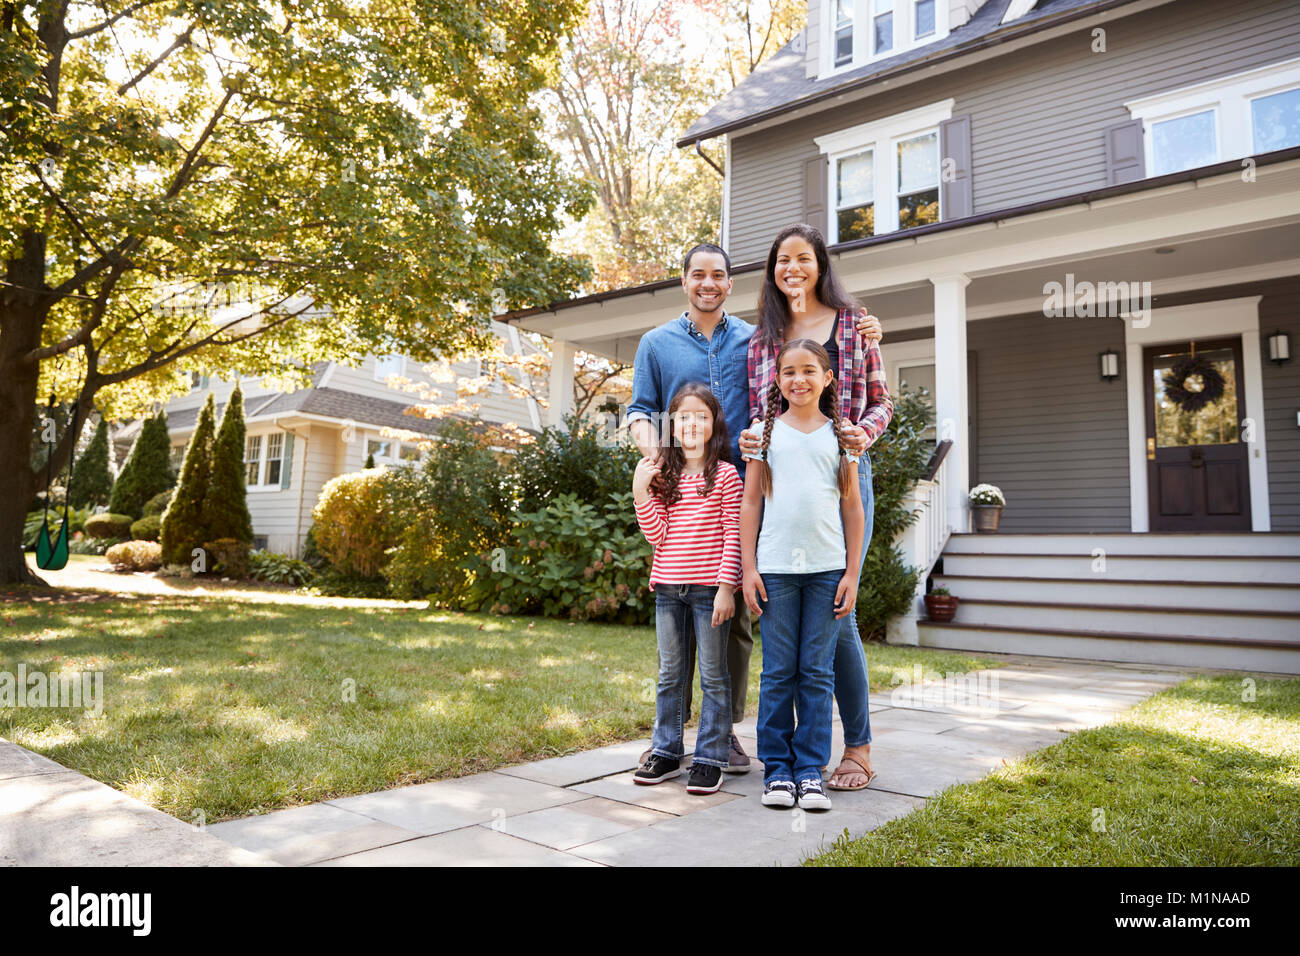 Portrait Of Smiling Family Standing In Front Of Their Home Stock Photo